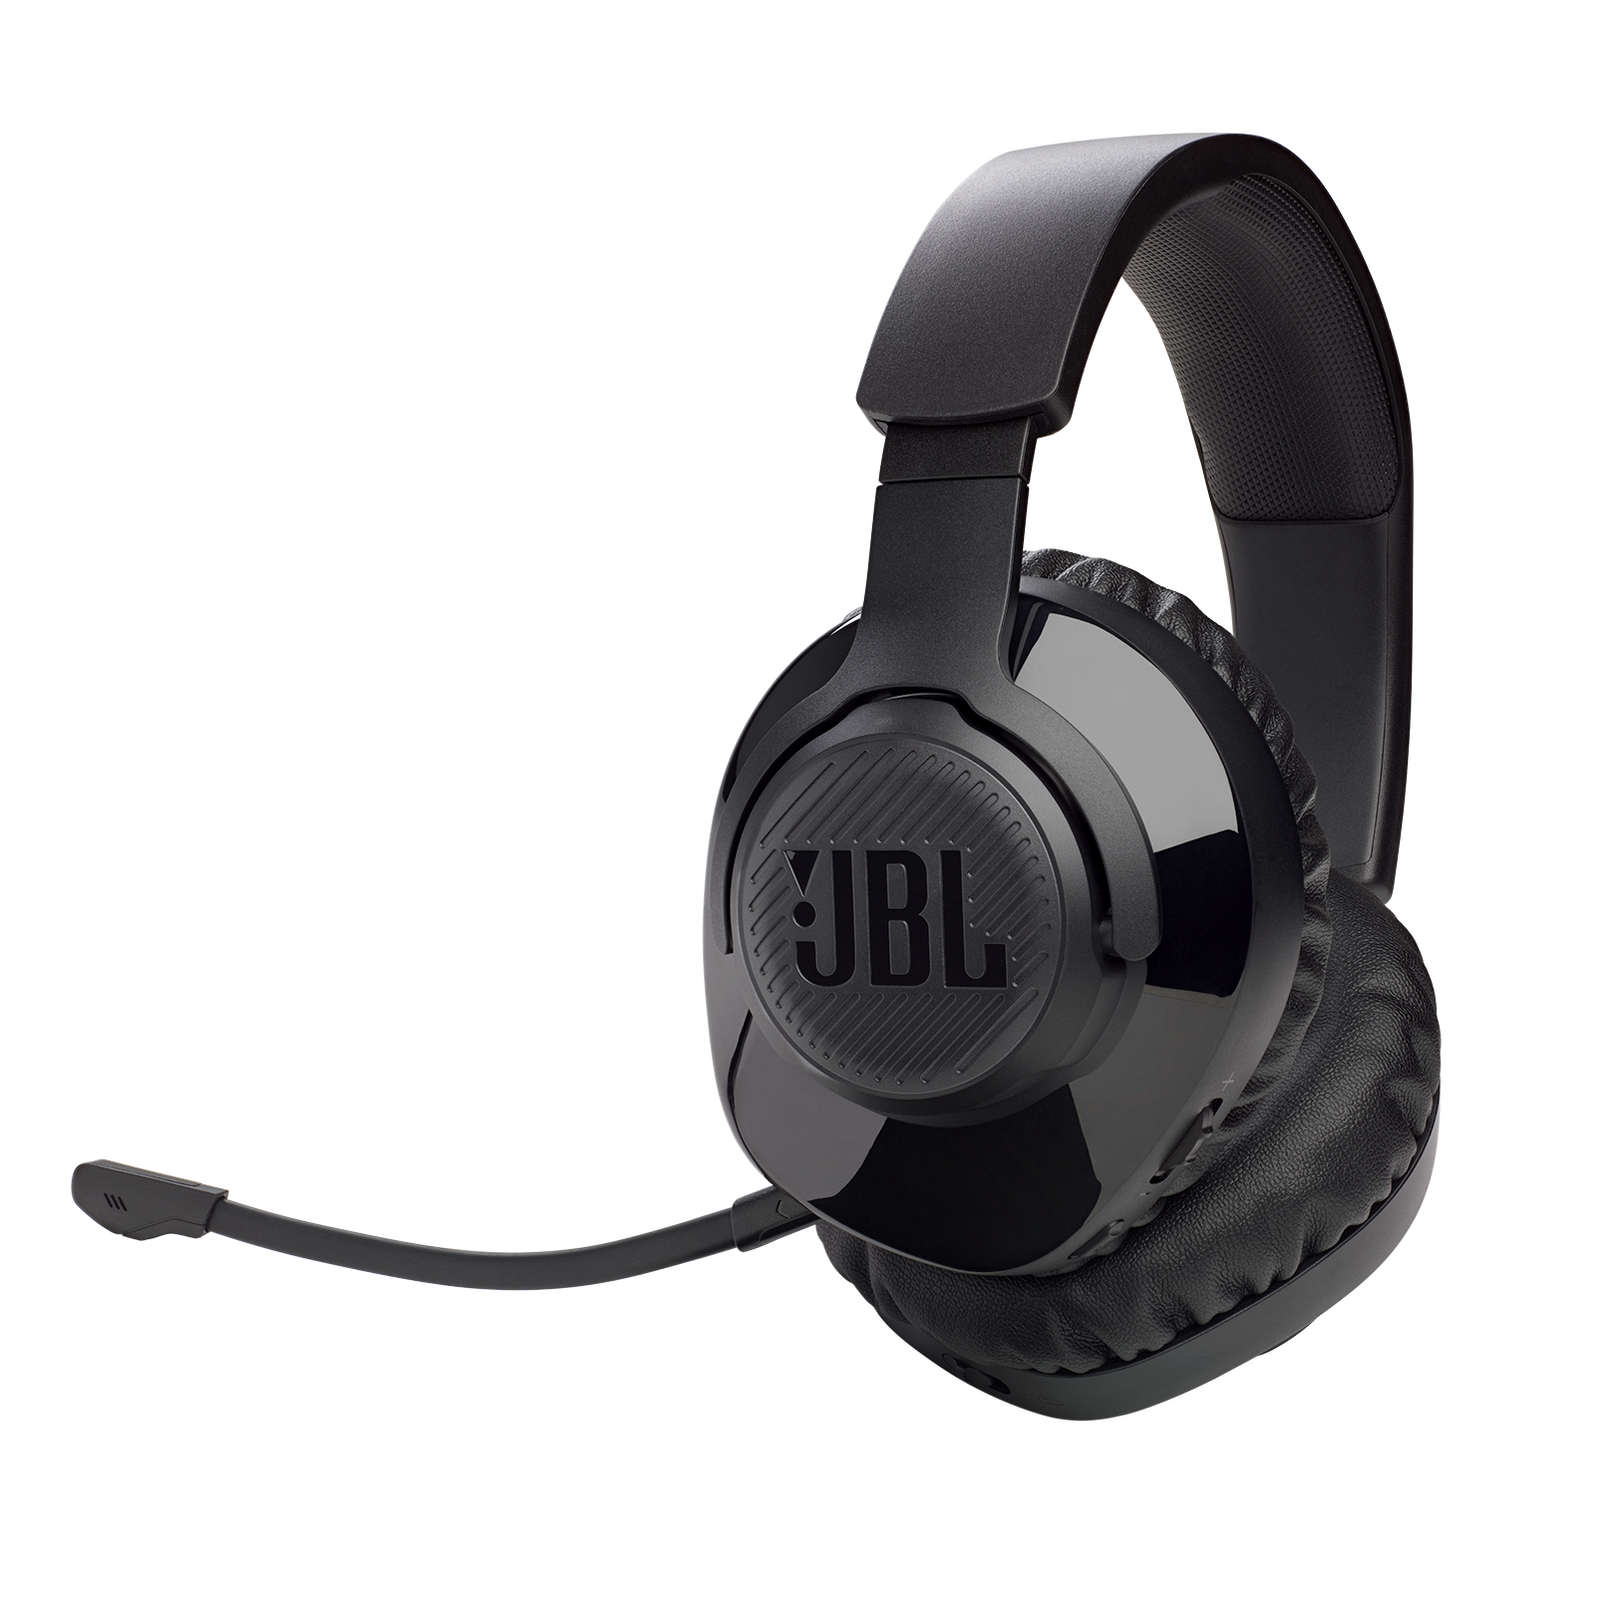 JBL Quantum 350 Black | Over-Ear Wireless Gaming Headset - QuantumSOUND - PS5/XBOX One/Switch/PC Compatible Gaming Headset REFURBISHED